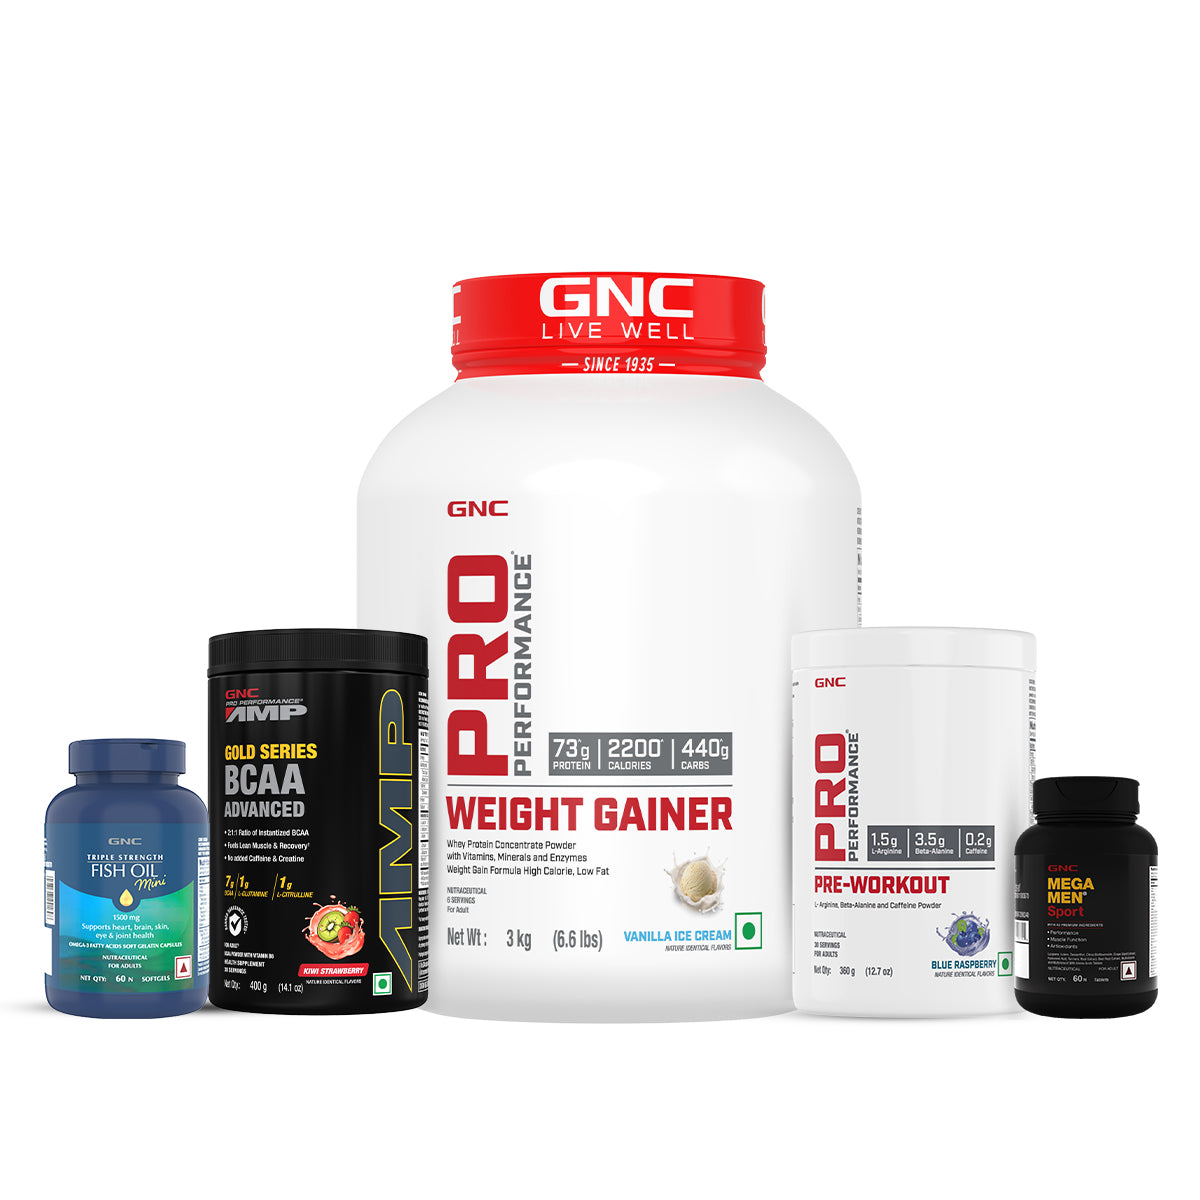 Epic Gains Stack -  - Healthy Body Gains | Improves Energy & Focus | Promotes Muscle Building | Improves Muscle Recovery | Maintains Healthy Cholesterol